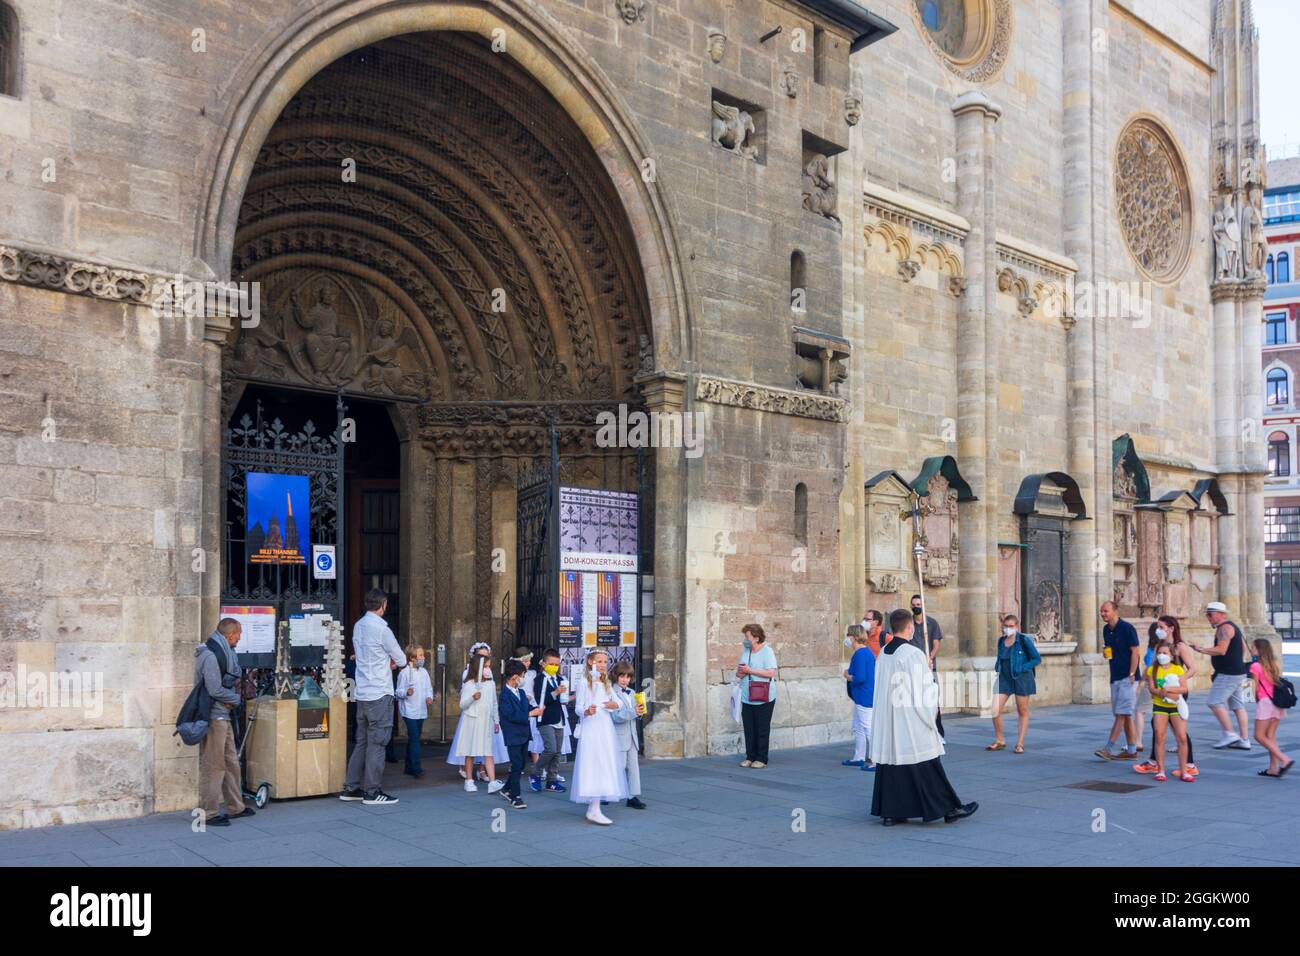 Vienna, procession after church service, children wearing FFP2 face masks, entrance of Stephansdom (St. Stephen's Cathedral) in 01. Old Town, Vienna, Austria Stock Photo